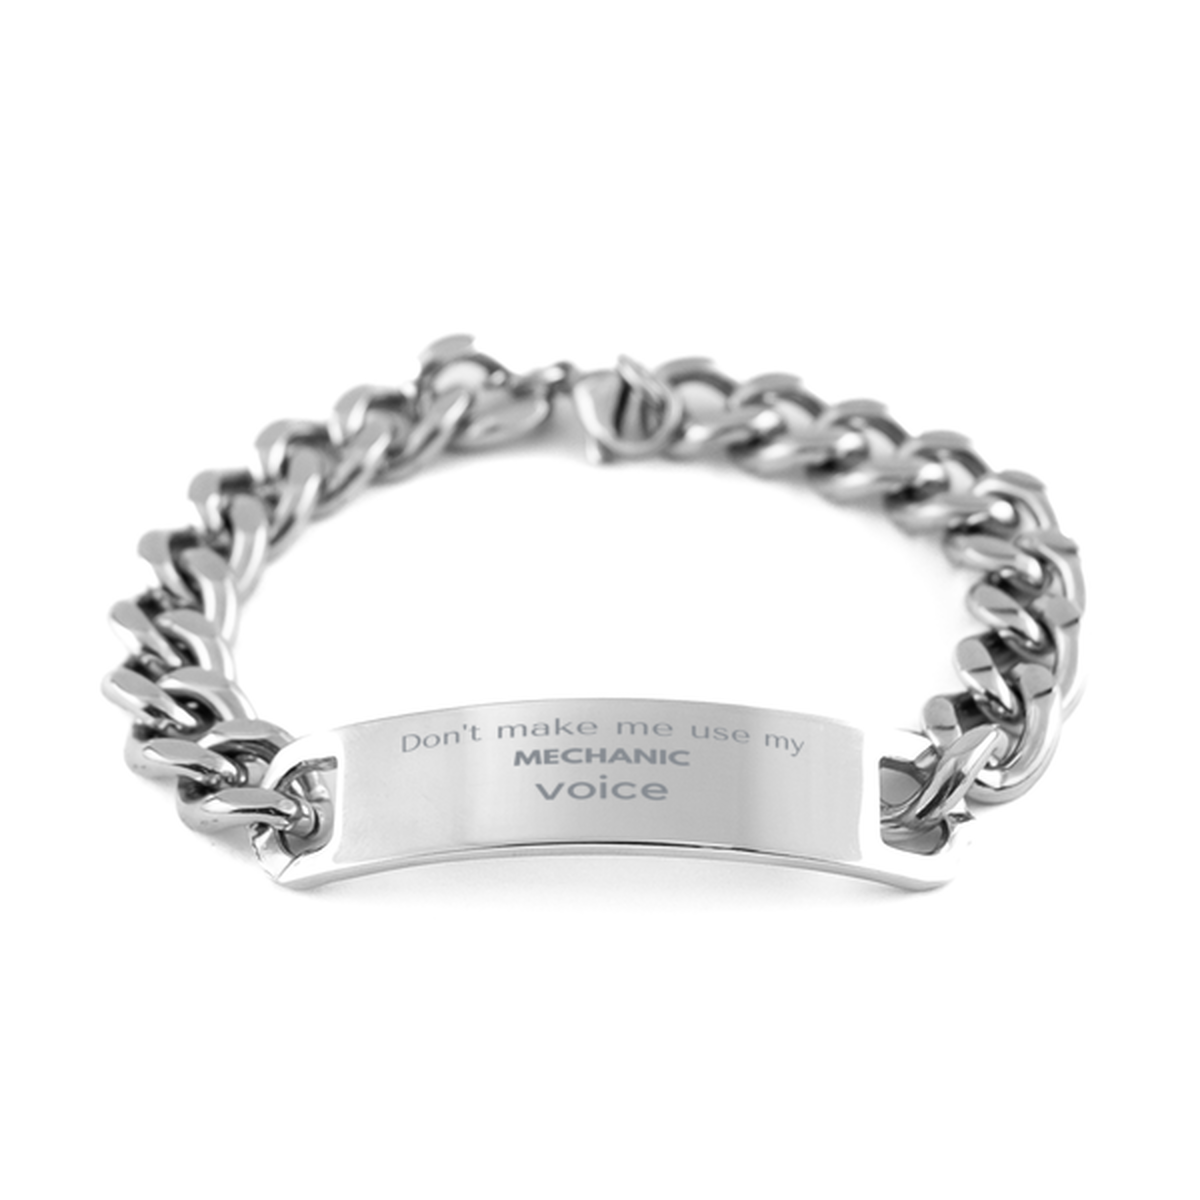 Don't make me use my Mechanic voice, Sarcasm Mechanic Gifts, Christmas Mechanic Cuban Chain Stainless Steel Bracelet Birthday Unique Gifts For Mechanic Coworkers, Men, Women, Colleague, Friends